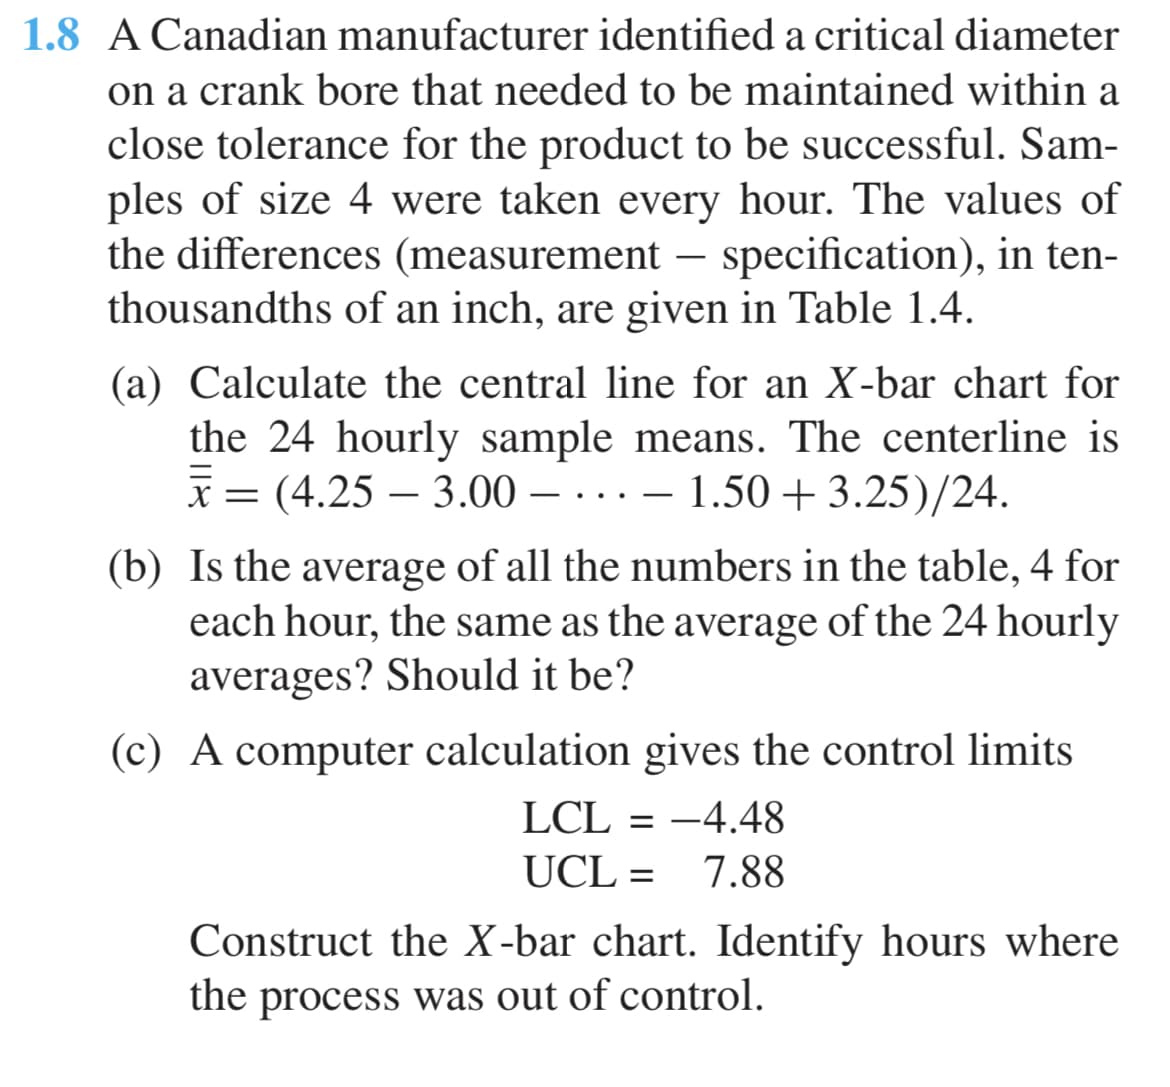 1.8 A Canadian manufacturer identified a critical diameter
on a crank bore that needed to be maintained within a
close tolerance for the product to be successful. Sam-
ples of size 4 were taken every hour. The values of
the differences (measurement - specification), in ten-
thousandths of an inch, are given in Table 1.4.
(a) Calculate the central line for an X-bar chart for
the 24 hourly sample means. The centerline is
x = — . . .
(4.25 -3.00 -1.50 +3.25)/24.
=
(b) Is the average of all the numbers in the table, 4 for
each hour, the same as the average of the 24 hourly
averages? Should it be?
(c) A computer calculation gives the control limits
LCL = -4.48
UCL 7.88
=
Construct the X-bar chart. Identify hours where
the process was out of control.